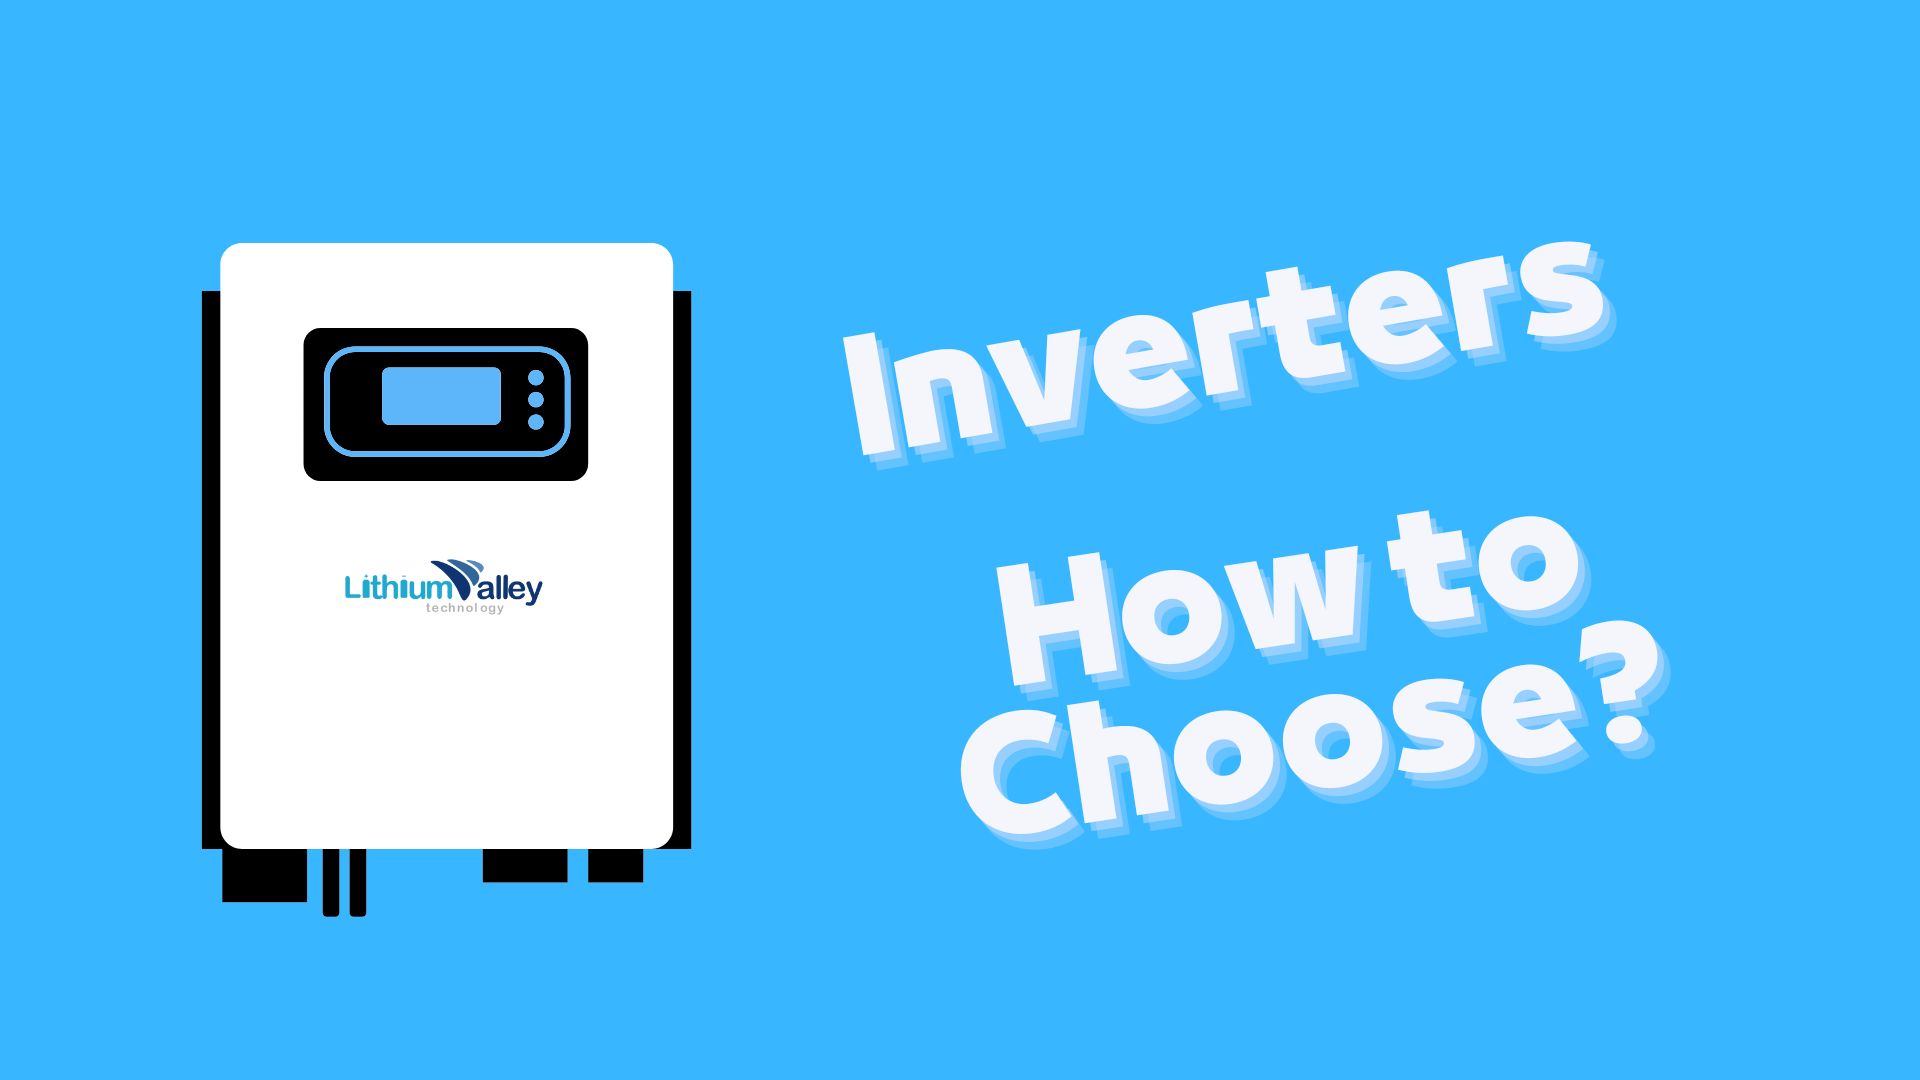 The Ultimate Guide to Choosing the Perfect Inverter: Expert Tips and Tricks to Power Your Life!